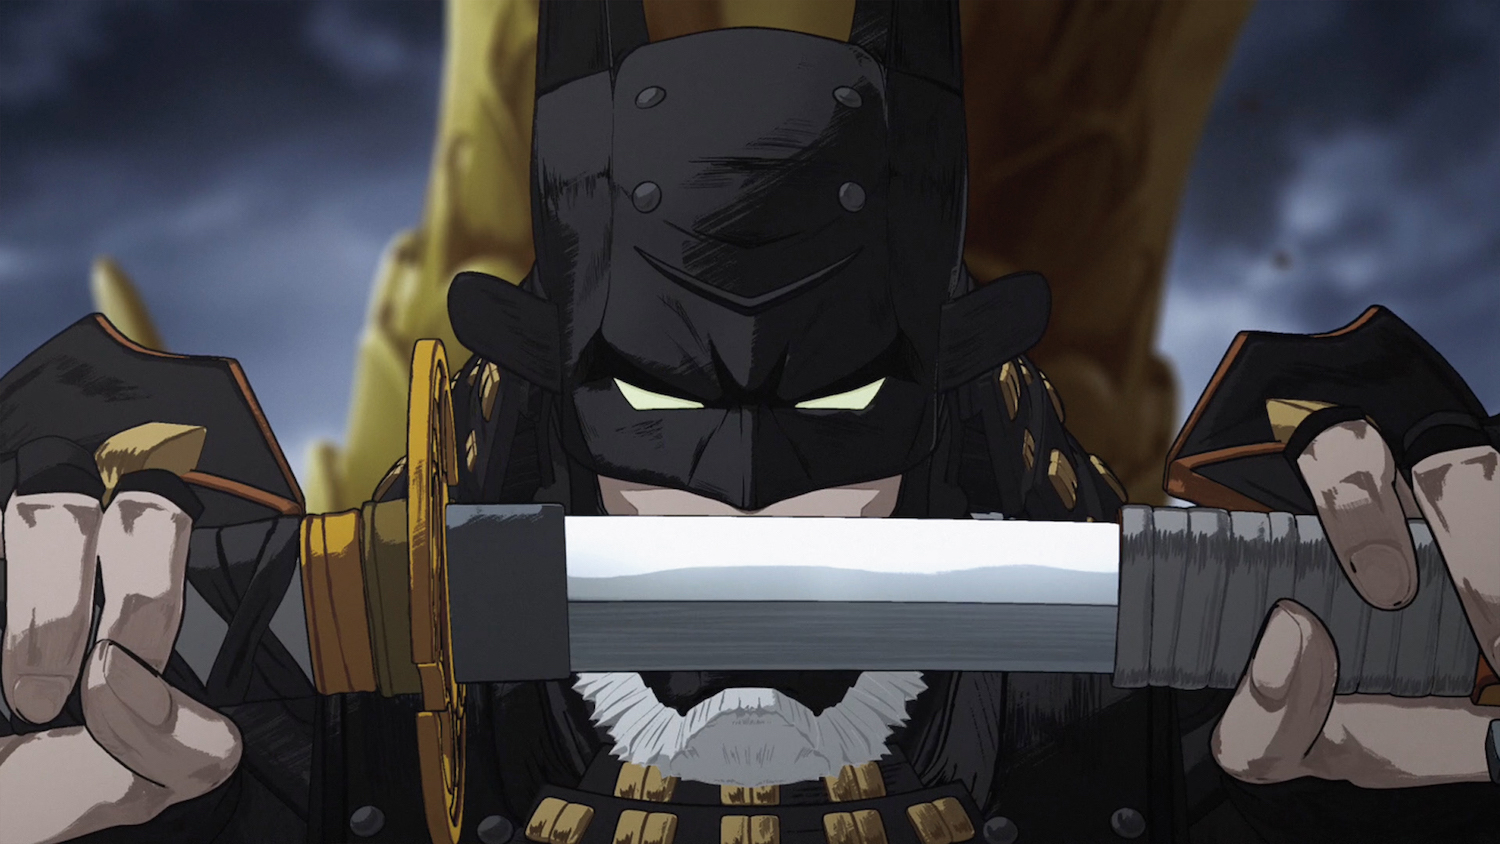  BATMAN and all related characters and elements © & ™ DC Comics and Warner Bros. Entertainment Inc. (s21)